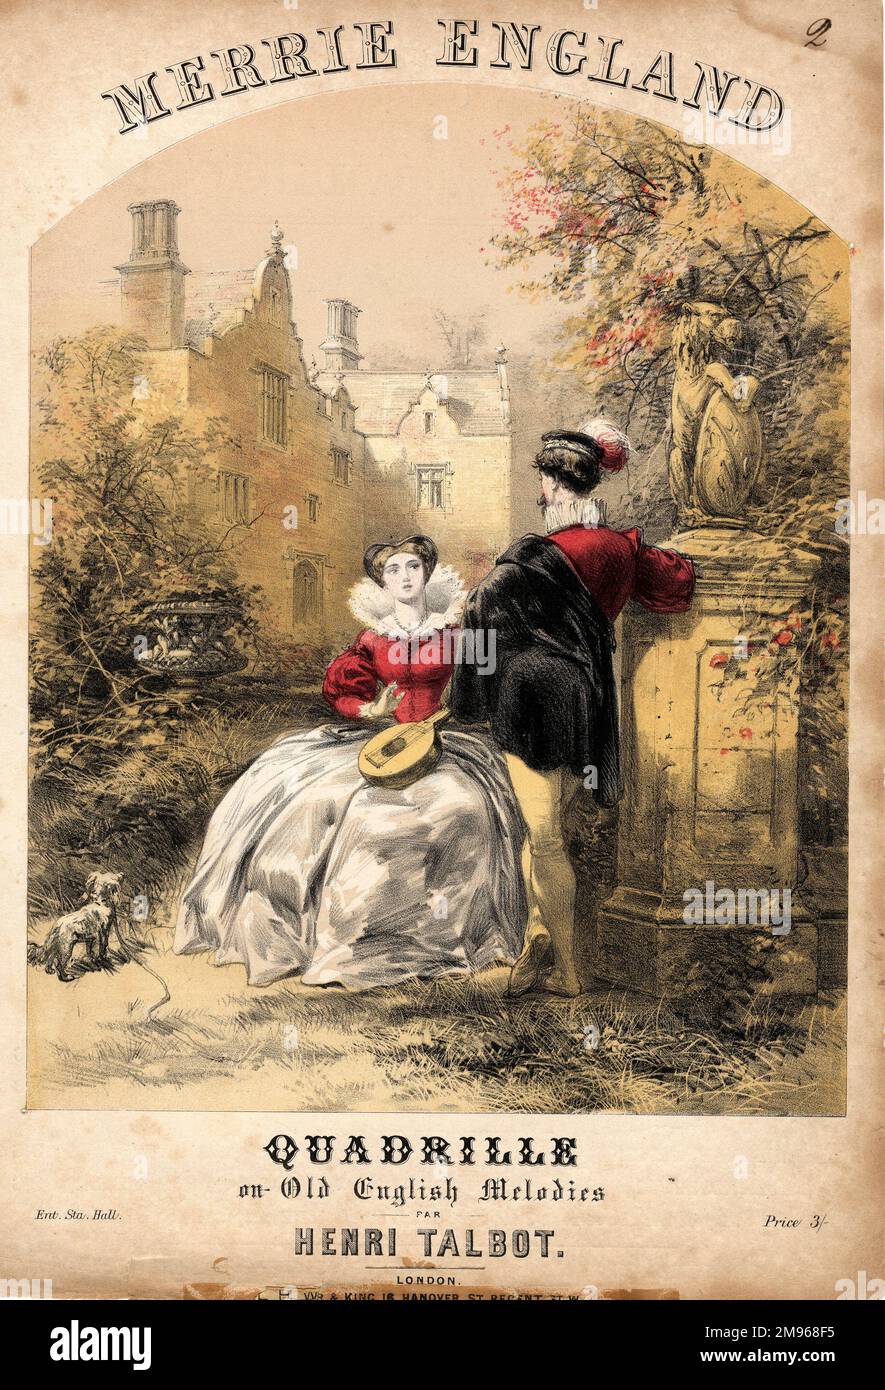 Music sheet cover for Merrie England Quadrille on Old English Melodies, by Henri Talbot.  An Elizabethan couple are depicted in the garden of a grand country house.  The lady is sitting with a mandolin in her lap, as if ready to play, while the man leans against a stone monument. Stock Photo